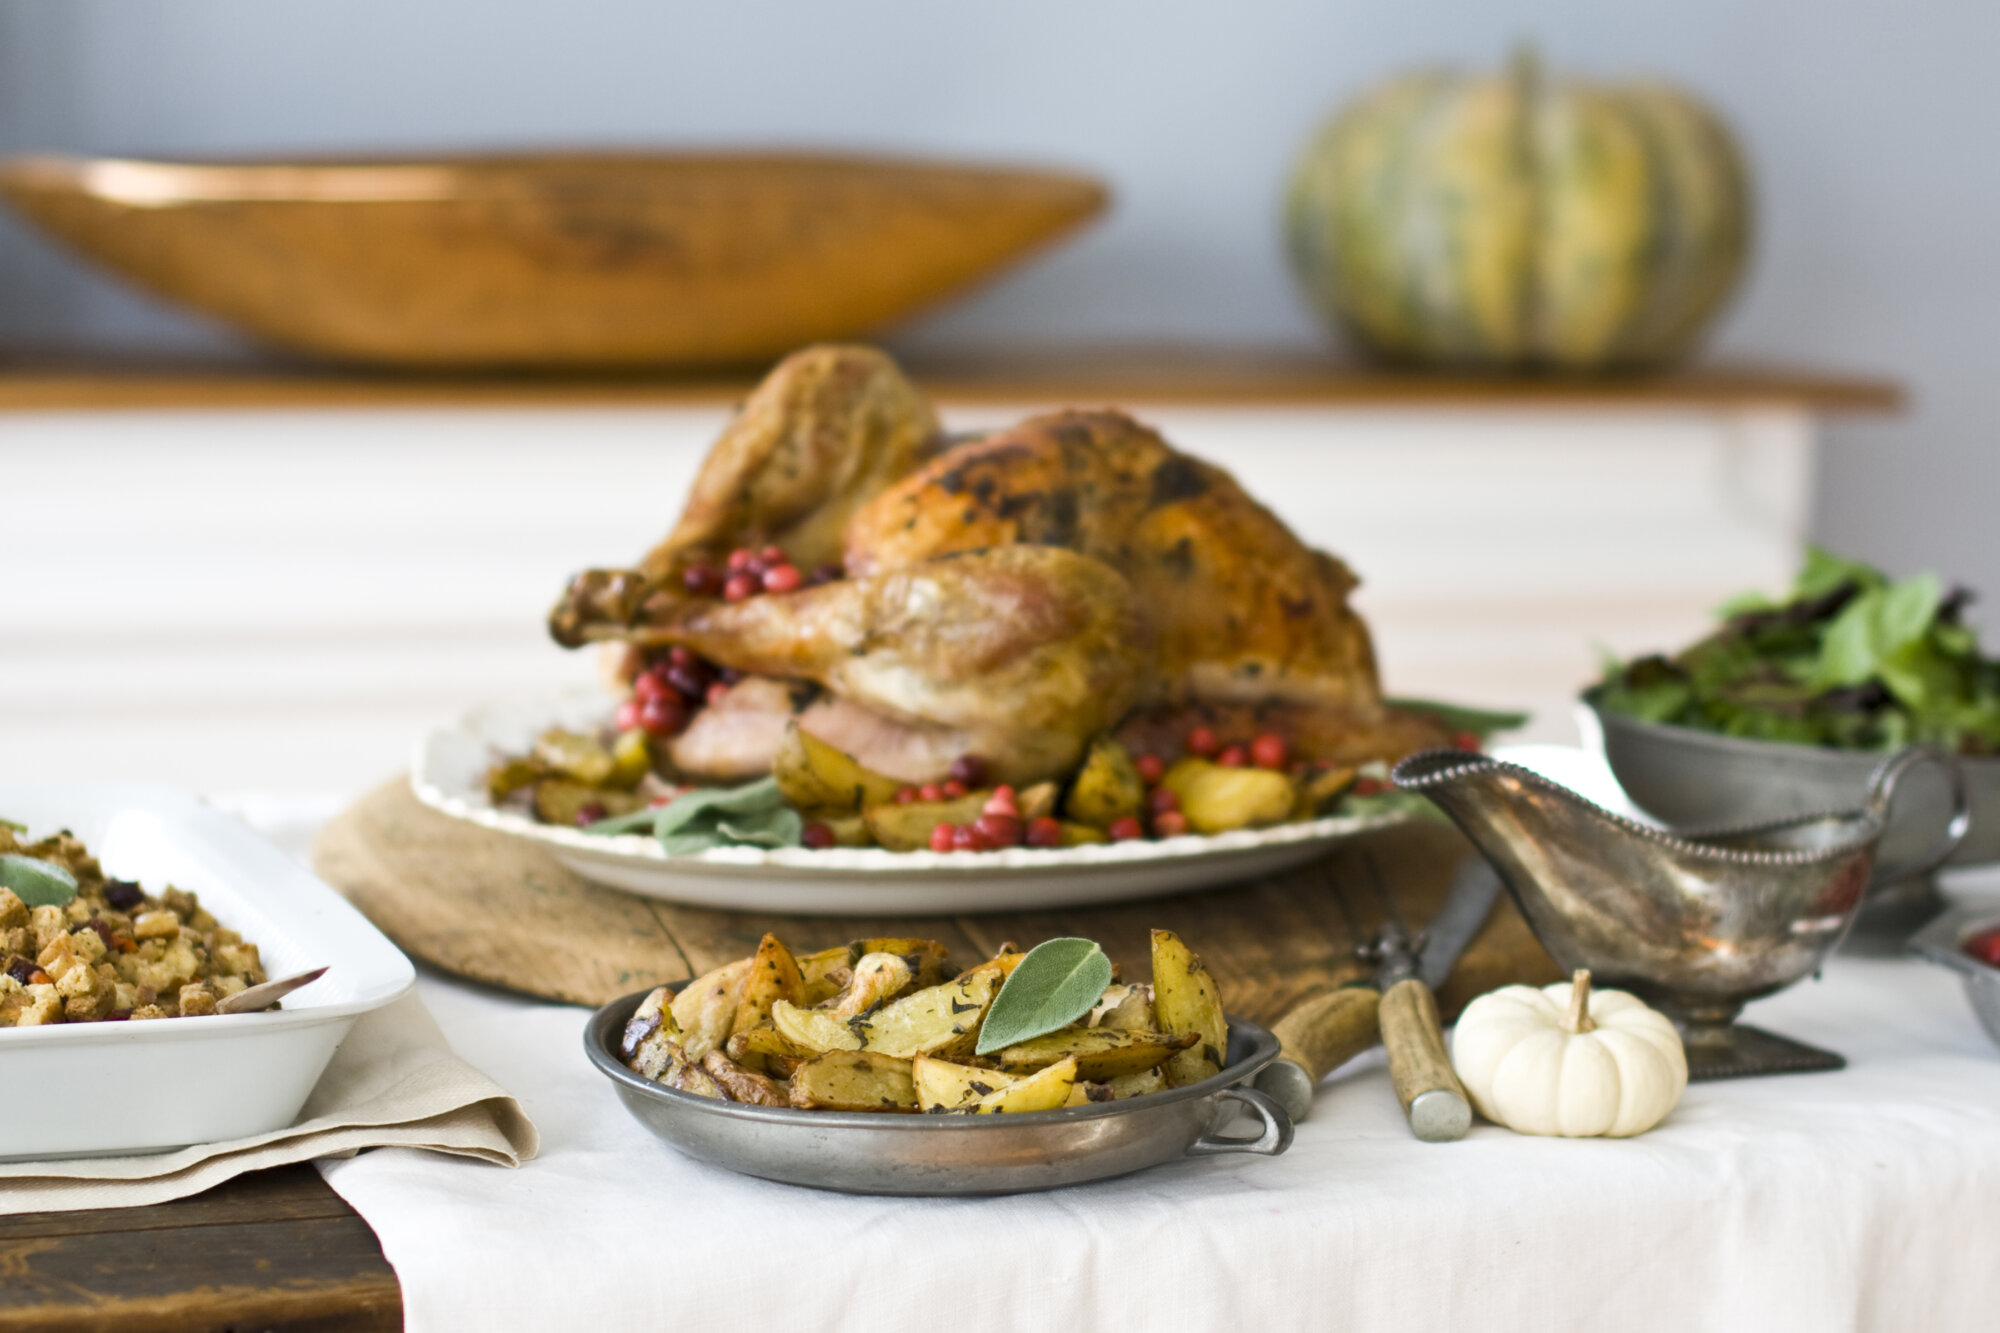 Hosting a holiday meal? Tips for making it diabetes-friendly